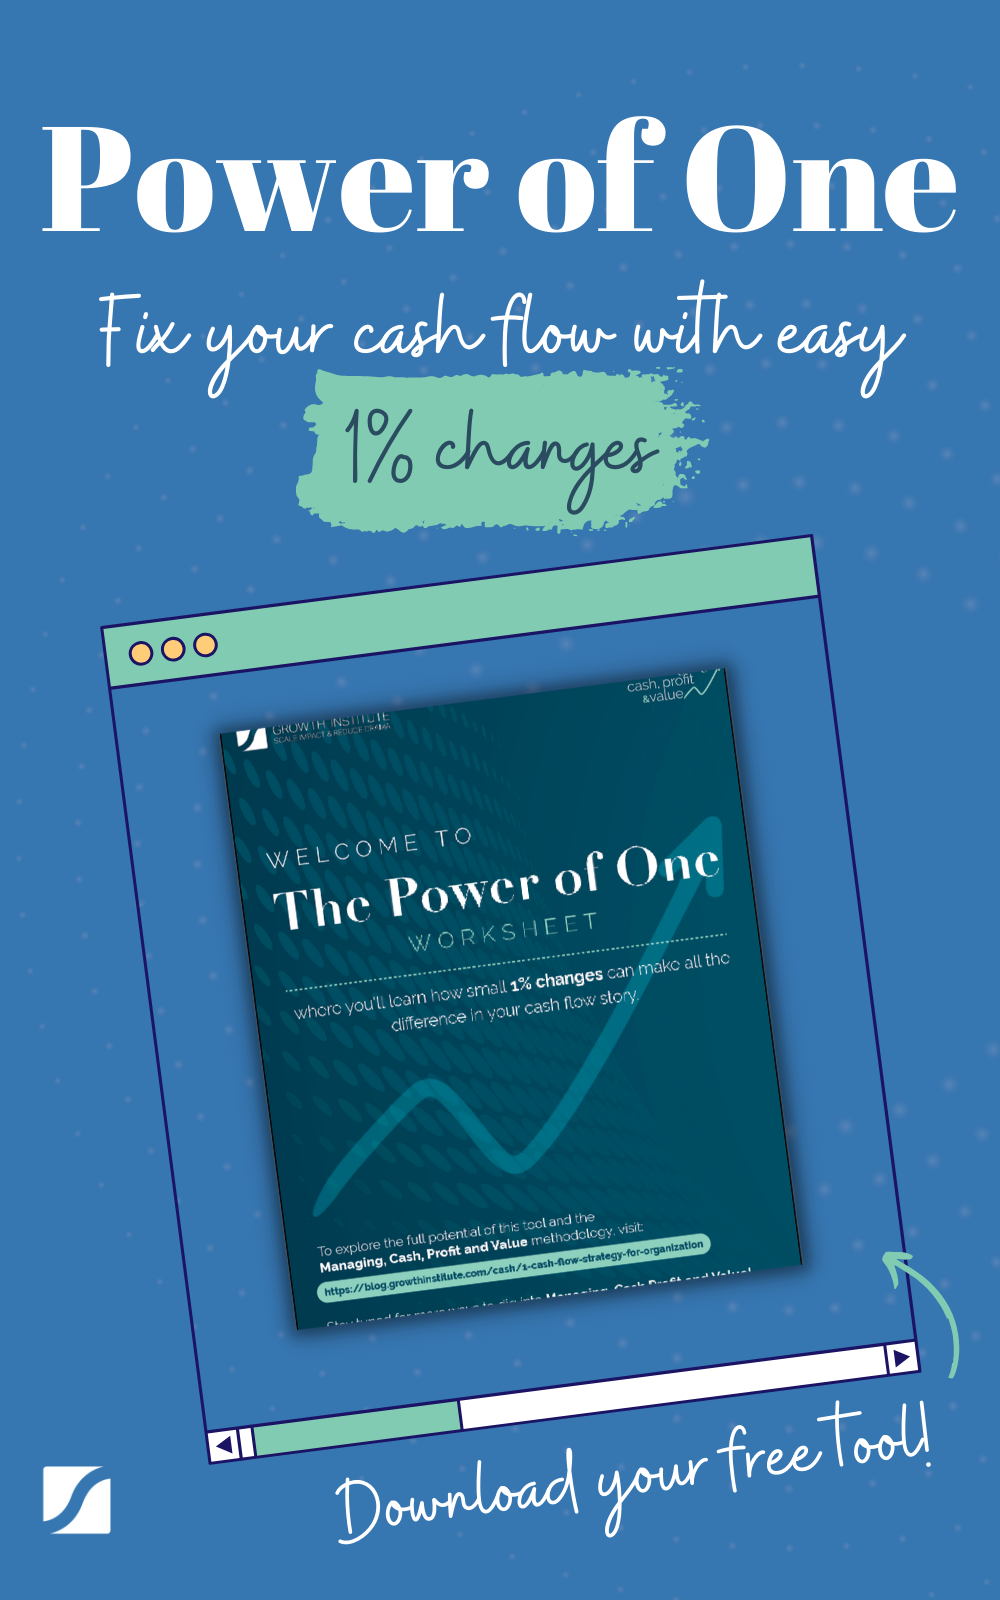 Power of one (1000 x 1600 px) article vertical banner cta